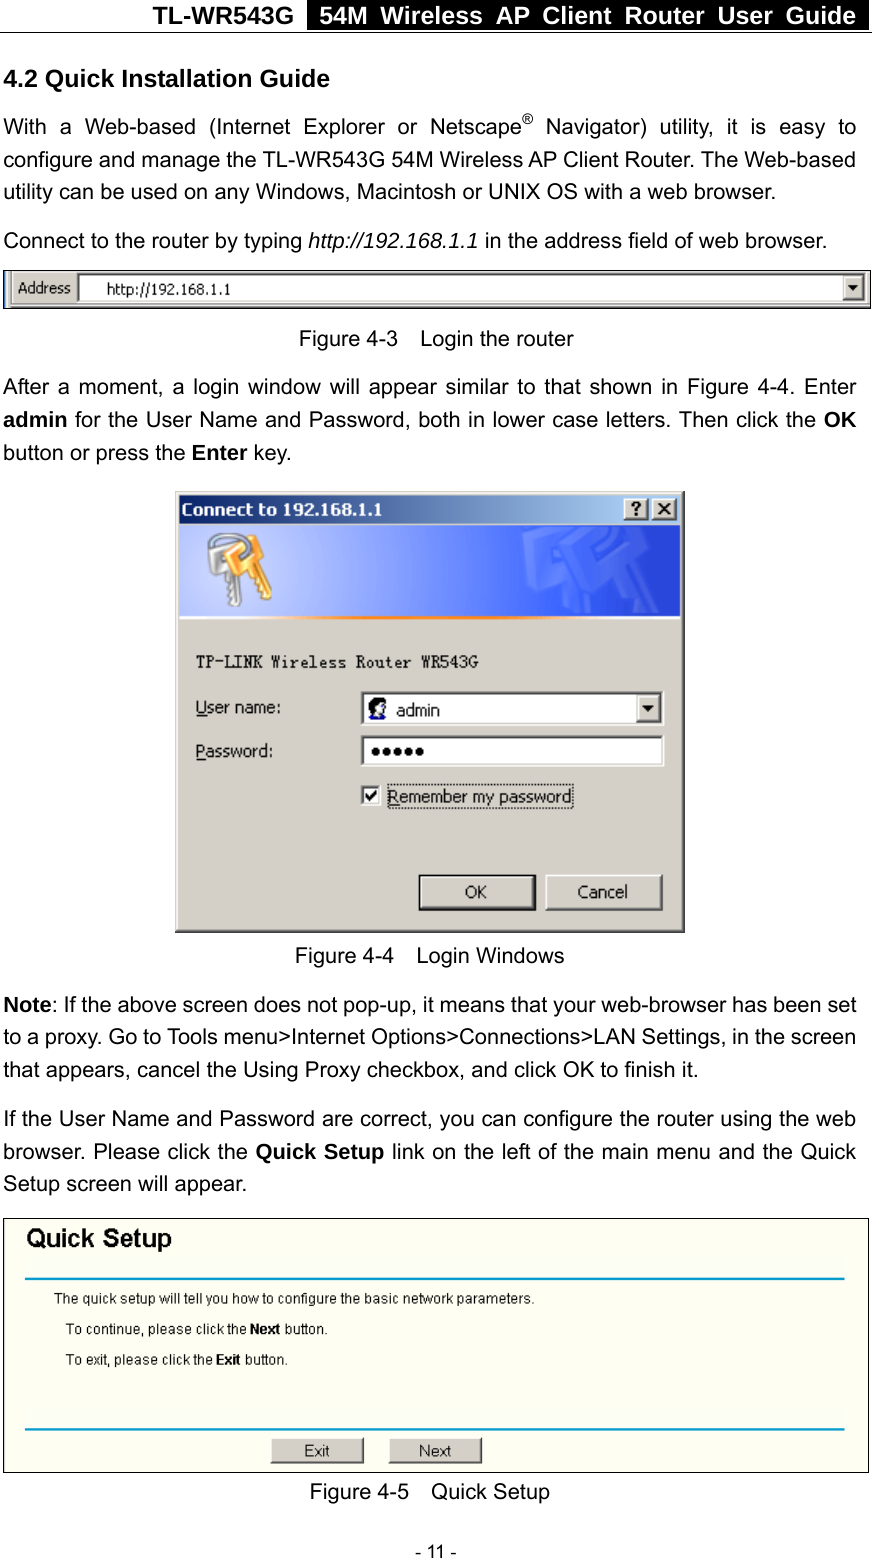 TL-WR543G   54M Wireless AP Client Router User Guide  4.2 Quick Installation Guide With a Web-based (Internet Explorer or Netscape® Navigator) utility, it is easy to configure and manage the TL-WR543G 54M Wireless AP Client Router. The Web-based utility can be used on any Windows, Macintosh or UNIX OS with a web browser. Connect to the router by typing http://192.168.1.1 in the address field of web browser.  Figure 4-3    Login the router After a moment, a login window will appear similar to that shown in Figure 4-4. Enter admin for the User Name and Password, both in lower case letters. Then click the OK button or press the Enter key.  Figure 4-4  Login Windows Note: If the above screen does not pop-up, it means that your web-browser has been set to a proxy. Go to Tools menu&gt;Internet Options&gt;Connections&gt;LAN Settings, in the screen that appears, cancel the Using Proxy checkbox, and click OK to finish it. If the User Name and Password are correct, you can configure the router using the web browser. Please click the Quick Setup link on the left of the main menu and the Quick Setup screen will appear.  Figure 4-5  Quick Setup  - 11 - 